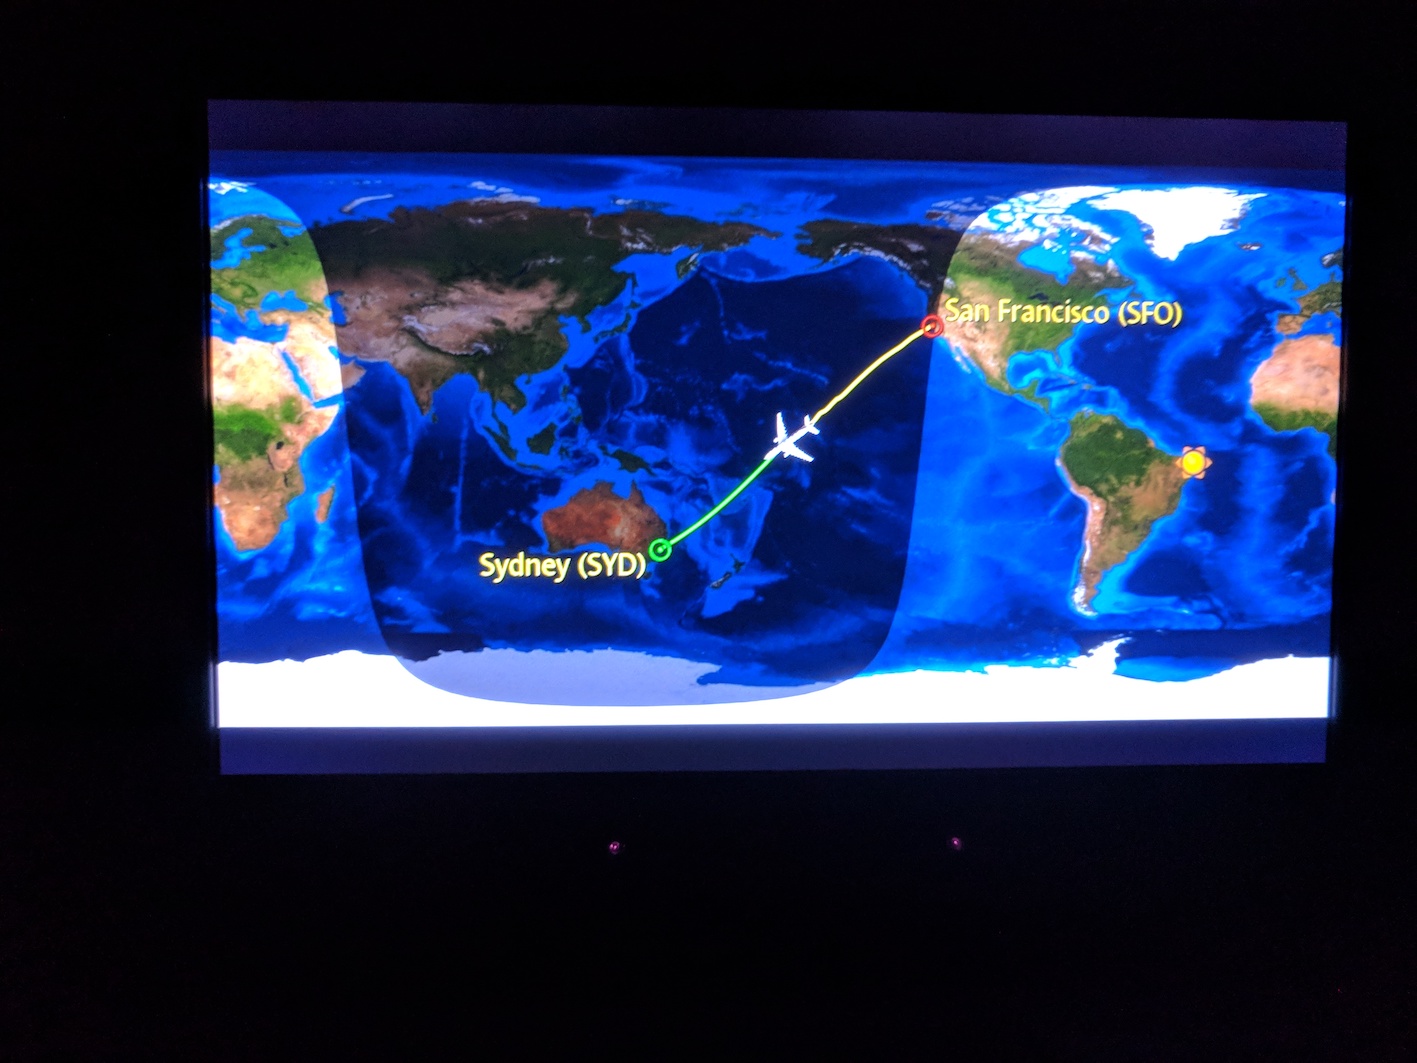 a map of the world with a plane going to san francisco